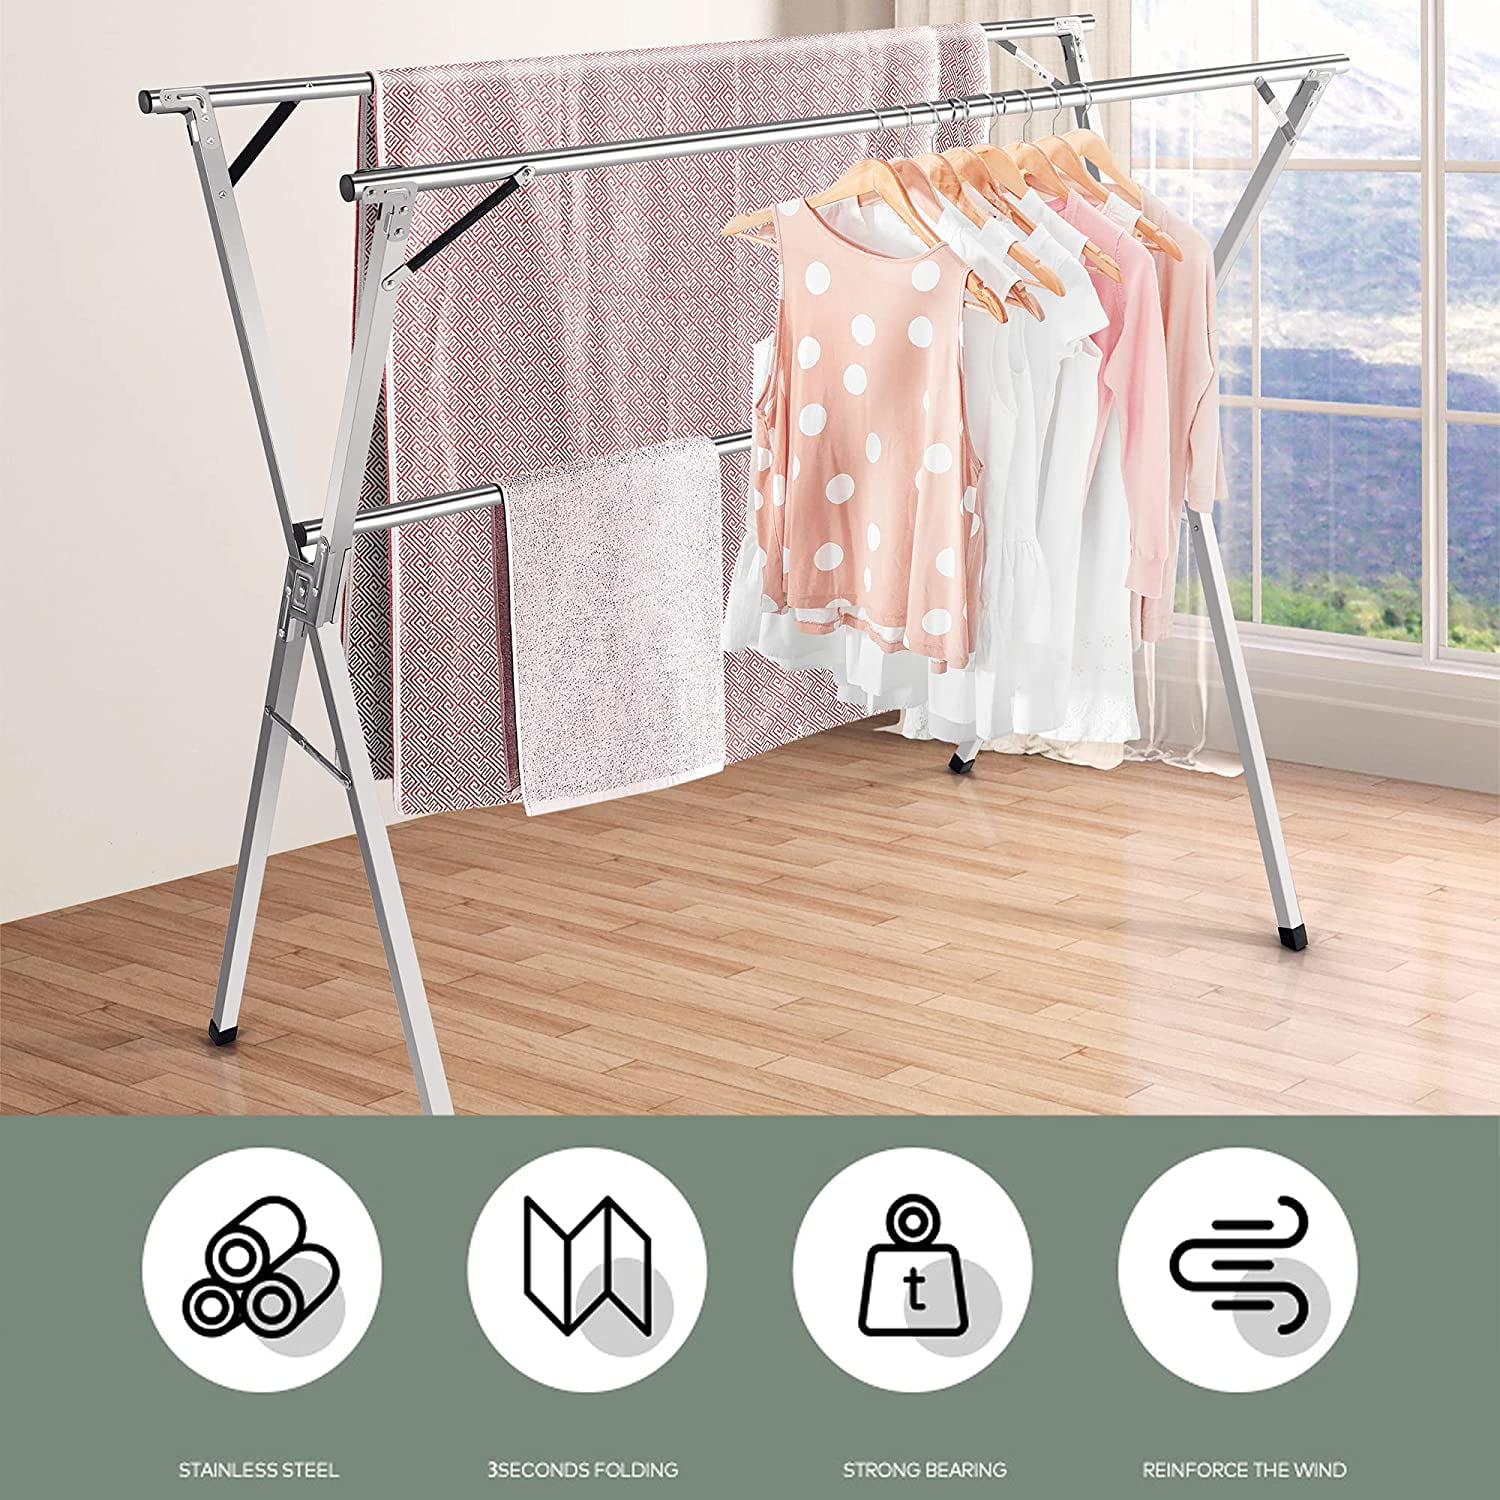 Scandinaf Foldable Clothes Drying Rack | Collapsible Drying Racks for  Laundry | Extra Large and Heavy Duty Clothing Drying Rack with Iron Wires  and